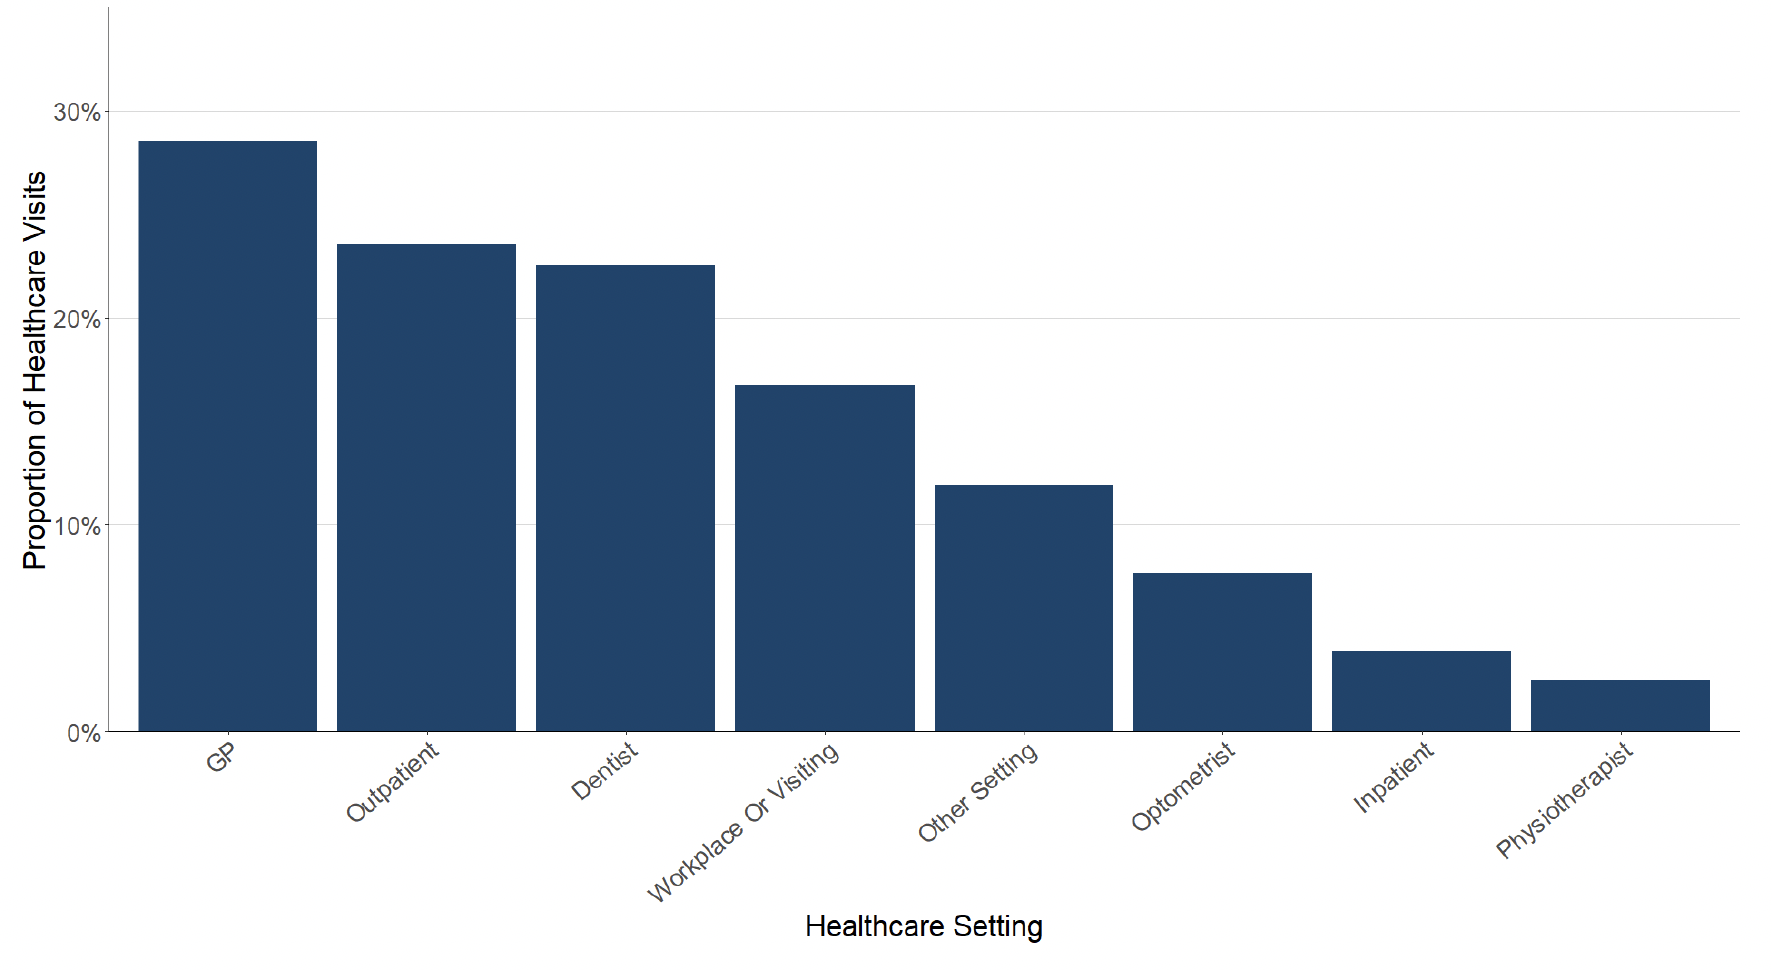 A bar chart showing the percentage of participants wearing a face covering in different healthcare settings within the last week.